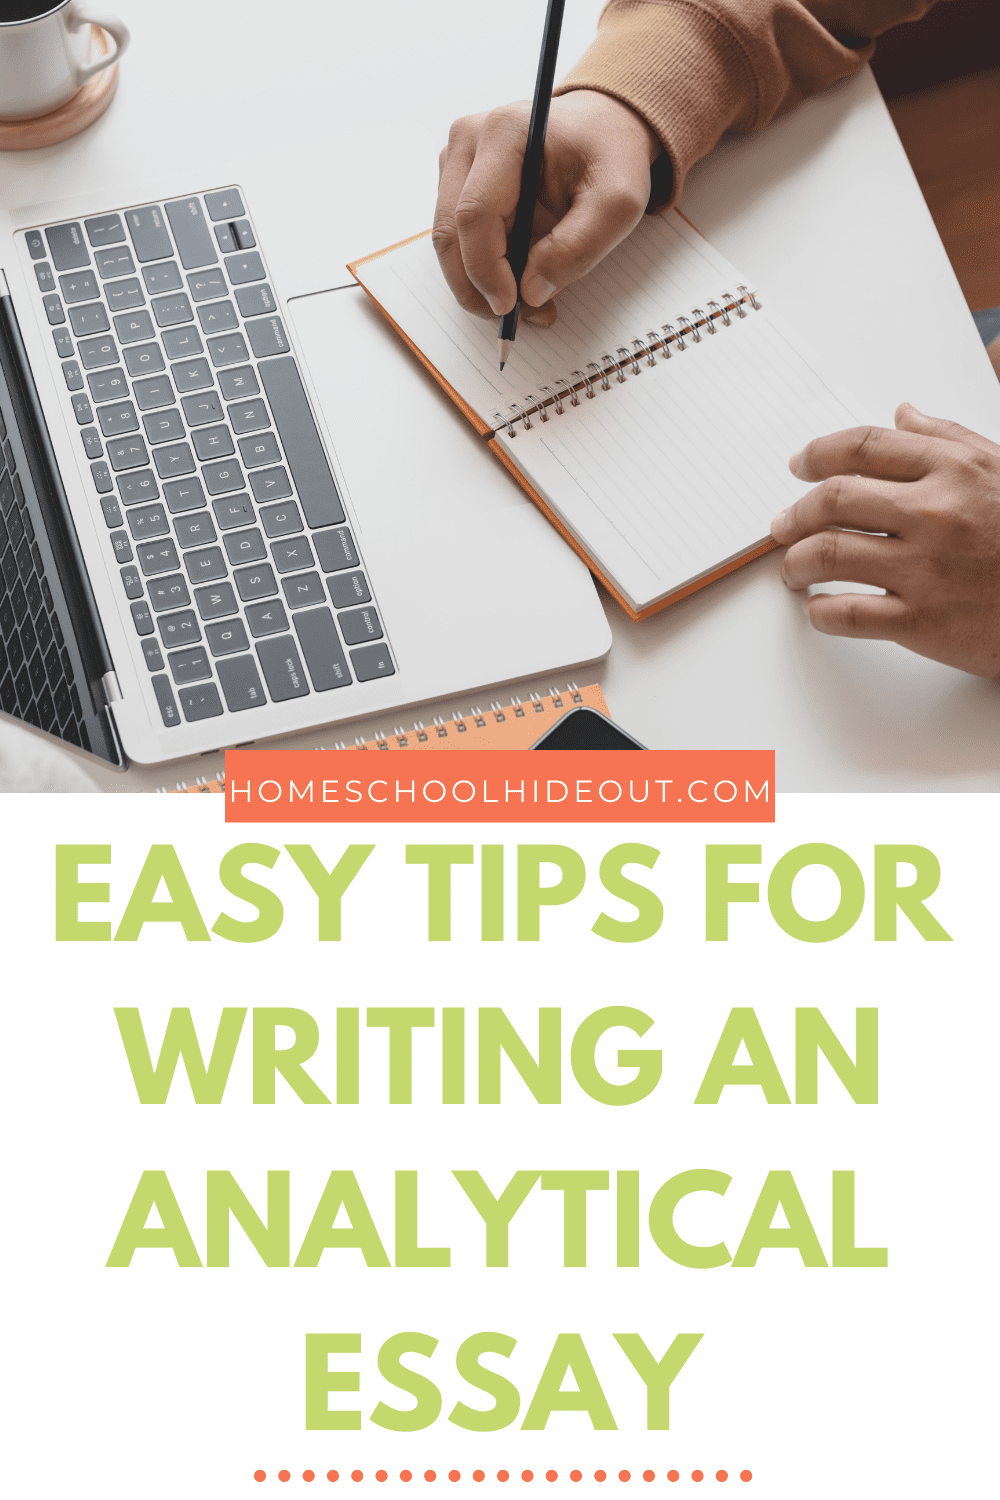 I LOVE these tips for writing an analytical essay! Great tips.